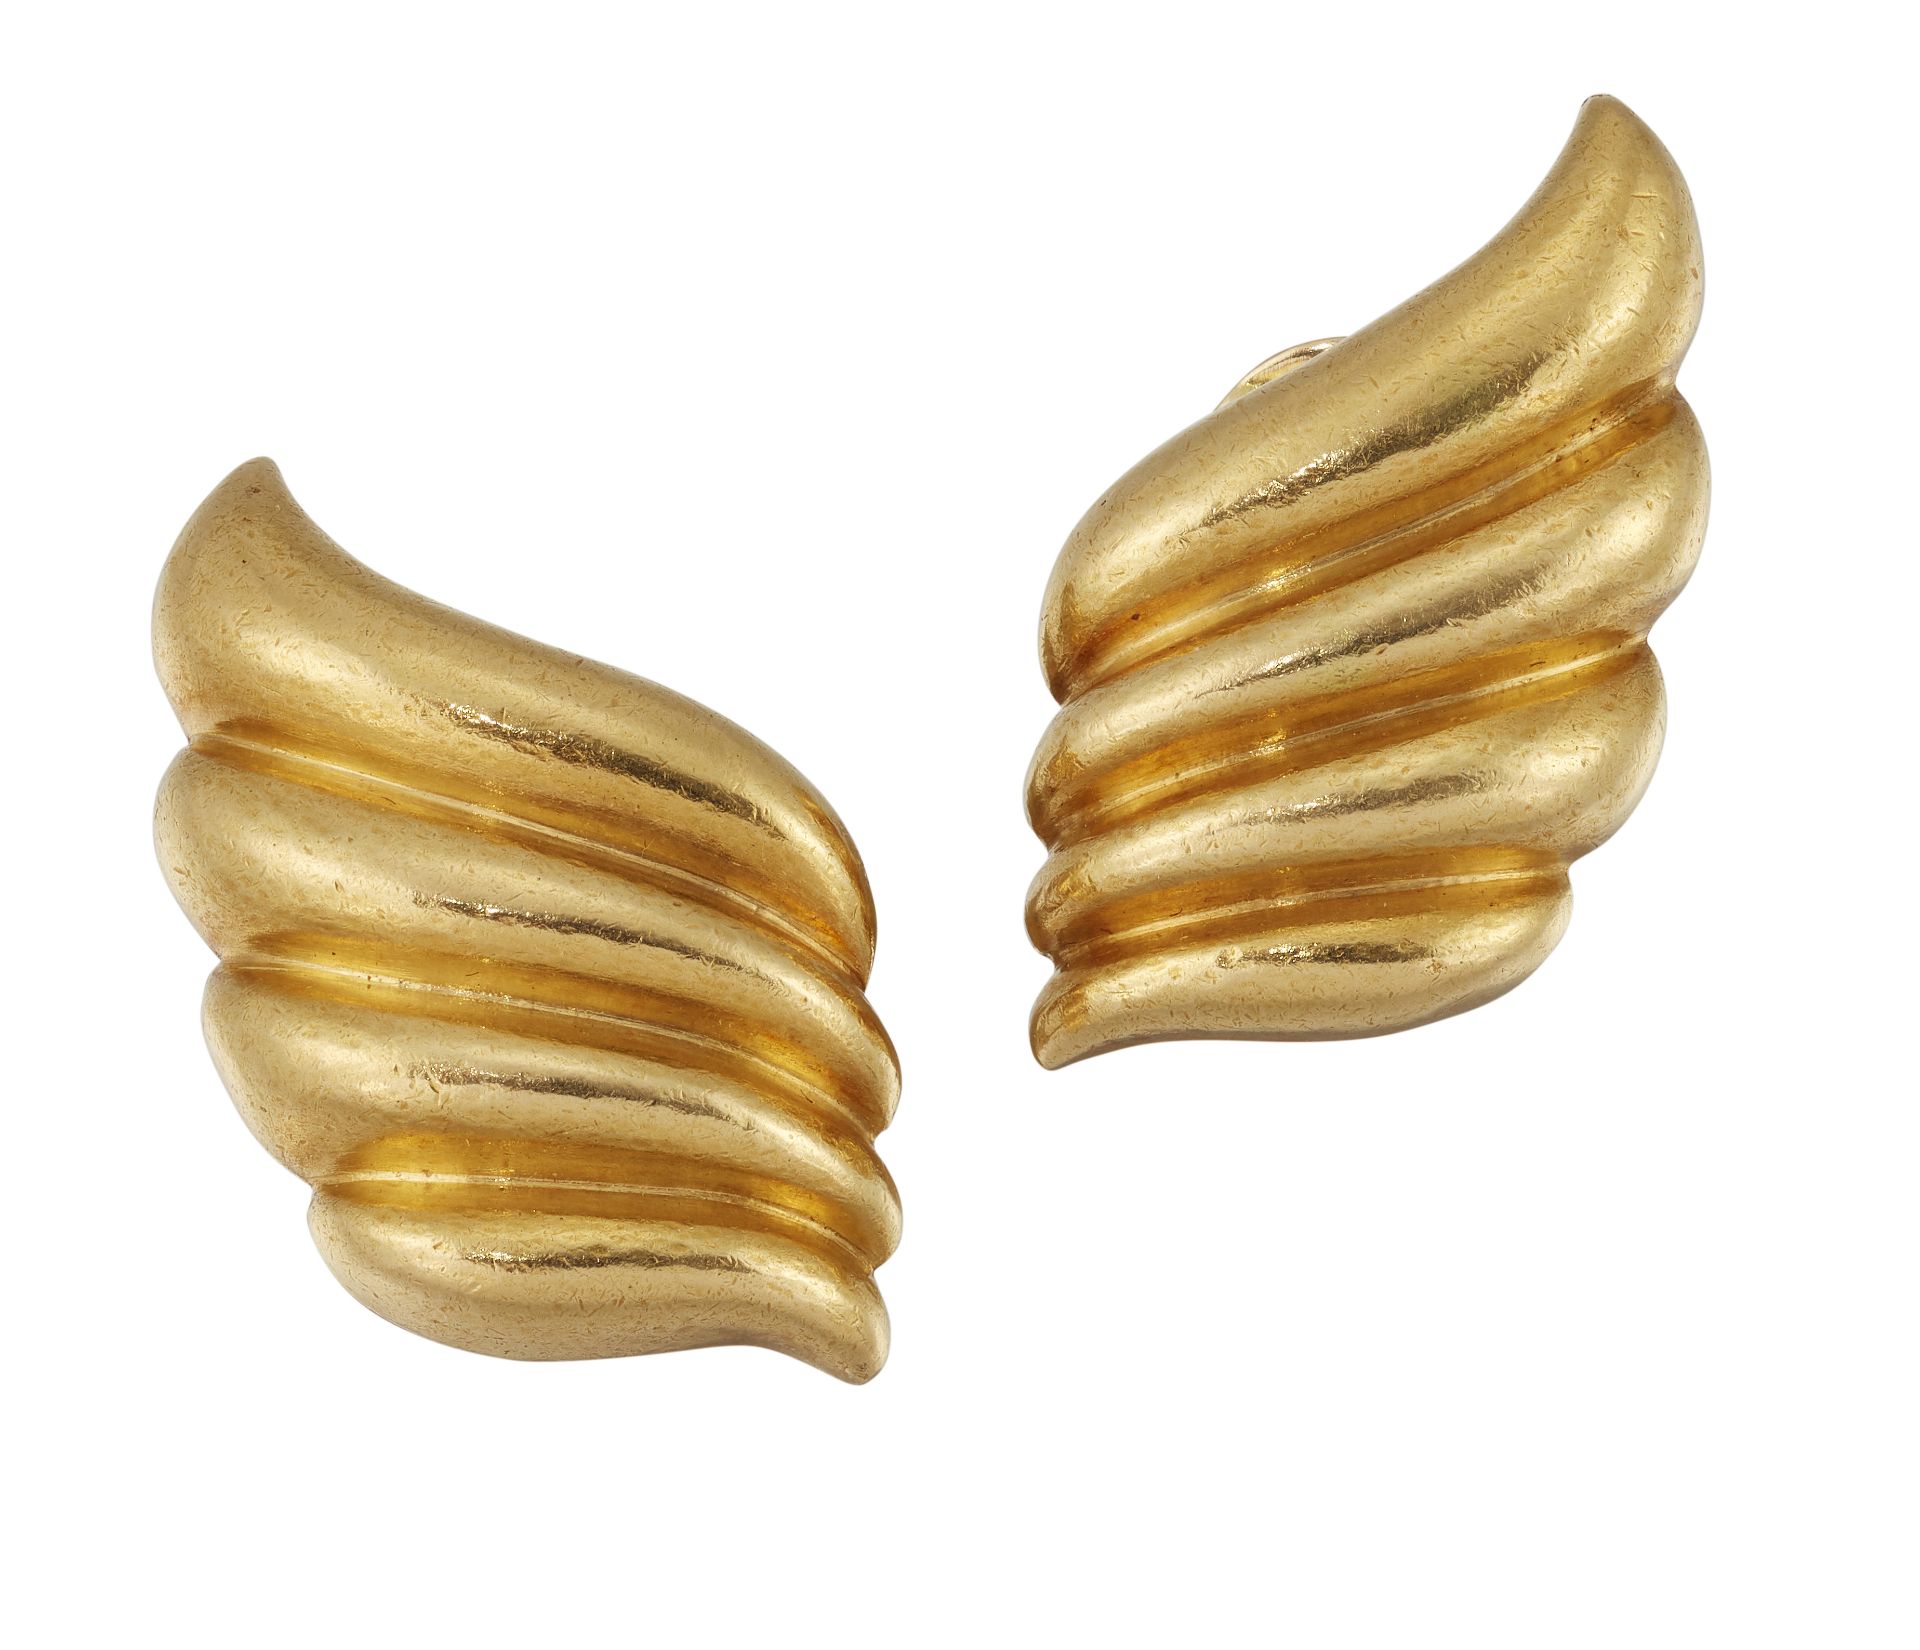 A PAIR OF 1970s CLIP EARRINGS, BY ZOLOTAS